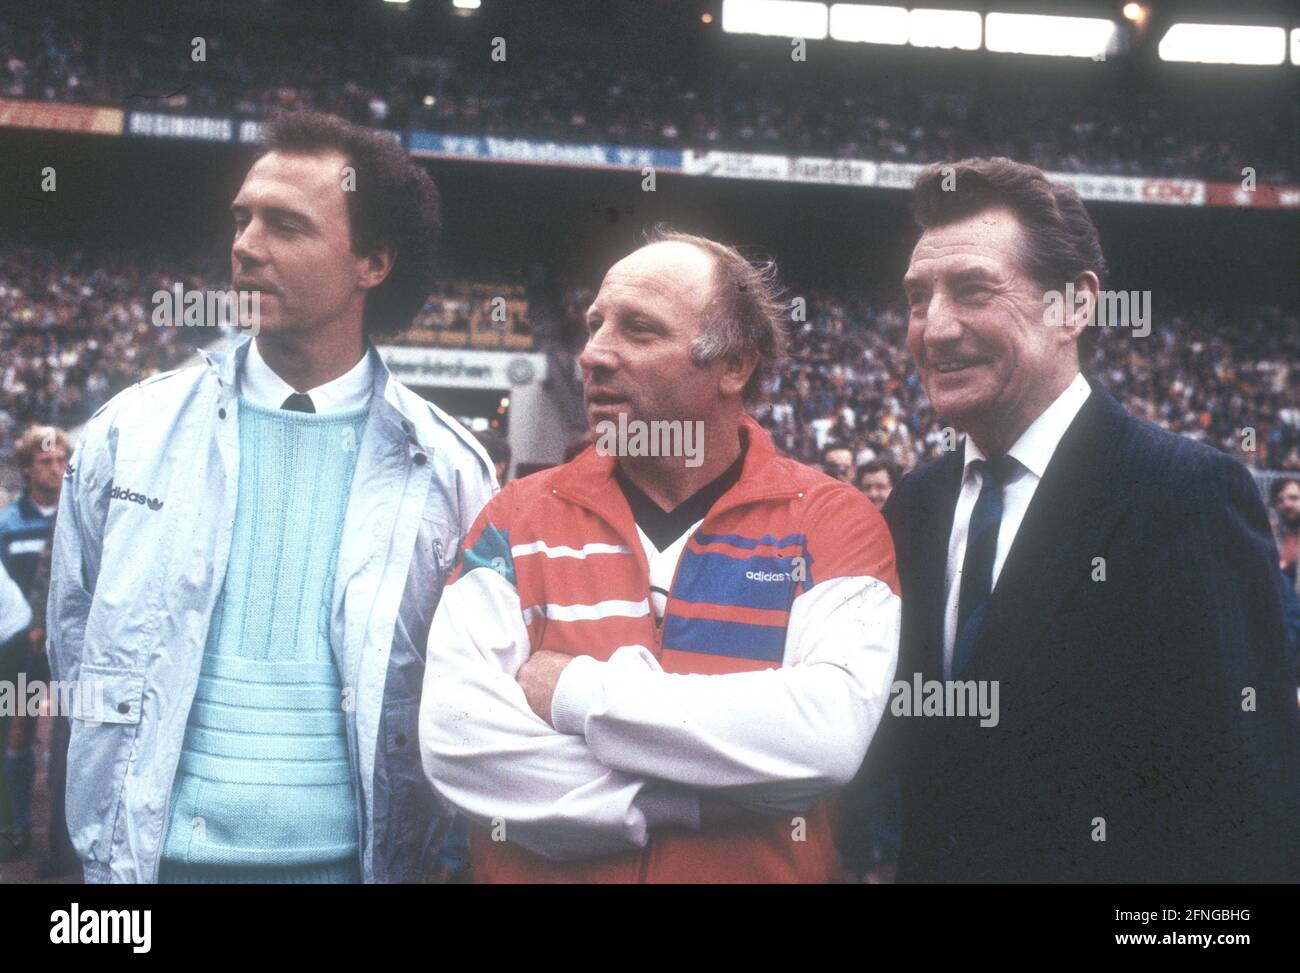 Farewell match for Klaus Fichtel on 26.08.1986 at the Parkstadion in Gelsenkirchen. From left: The three honorary captains of the German national team: Franz Beckenbauer, Uwe Seeler and Fritz Walter.  No model release ! [automated translation] Stock Photo